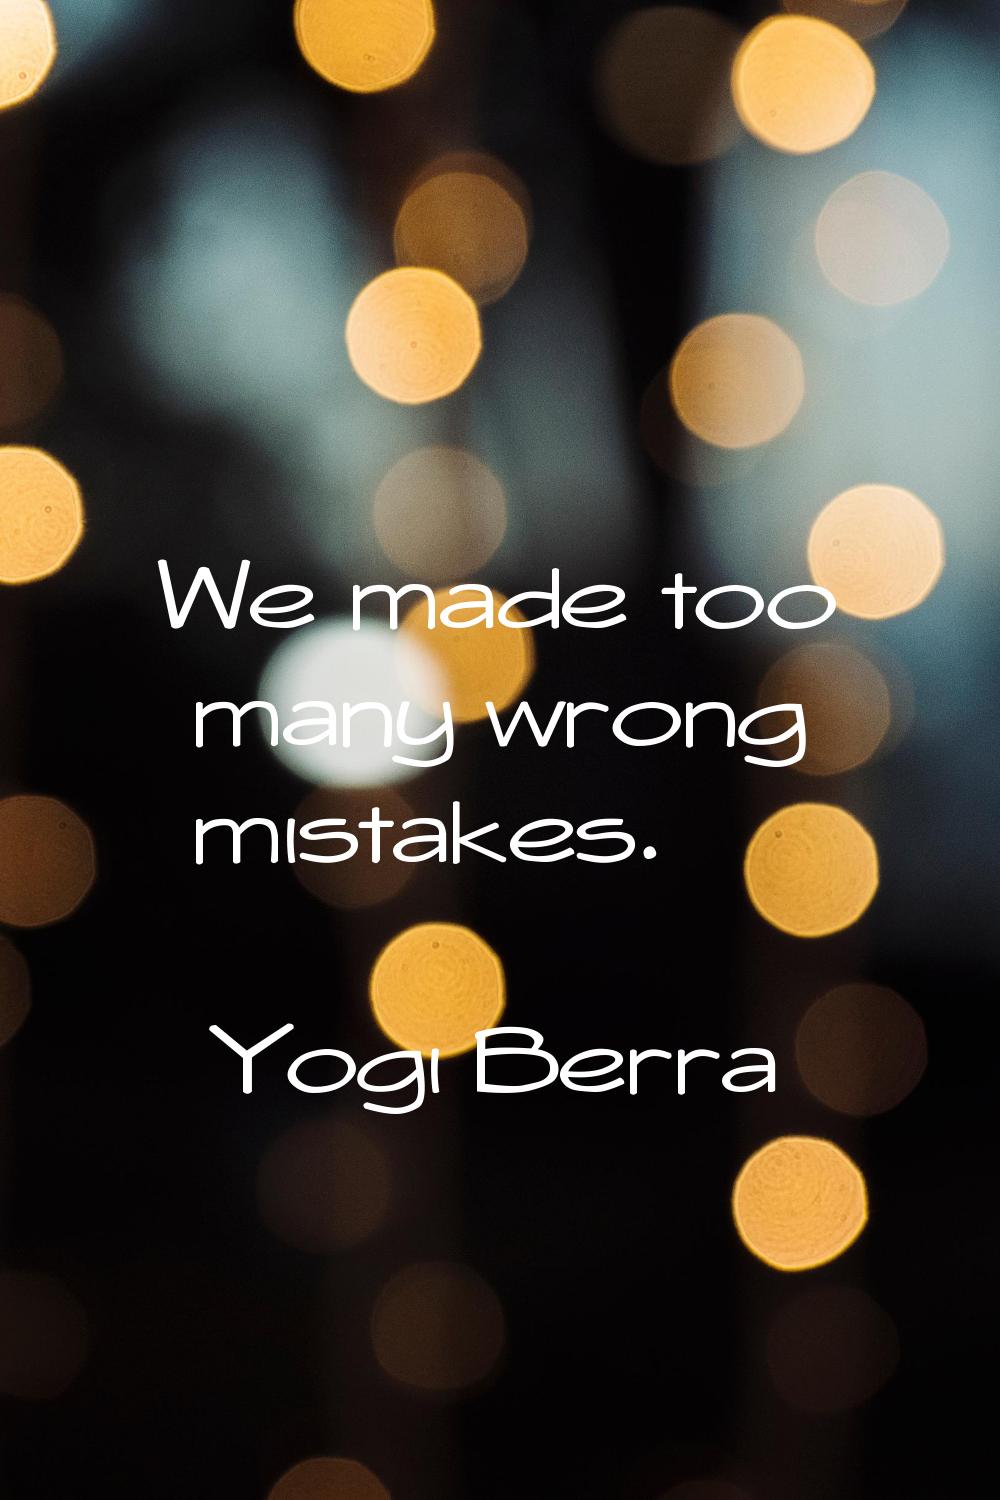 We made too many wrong mistakes.